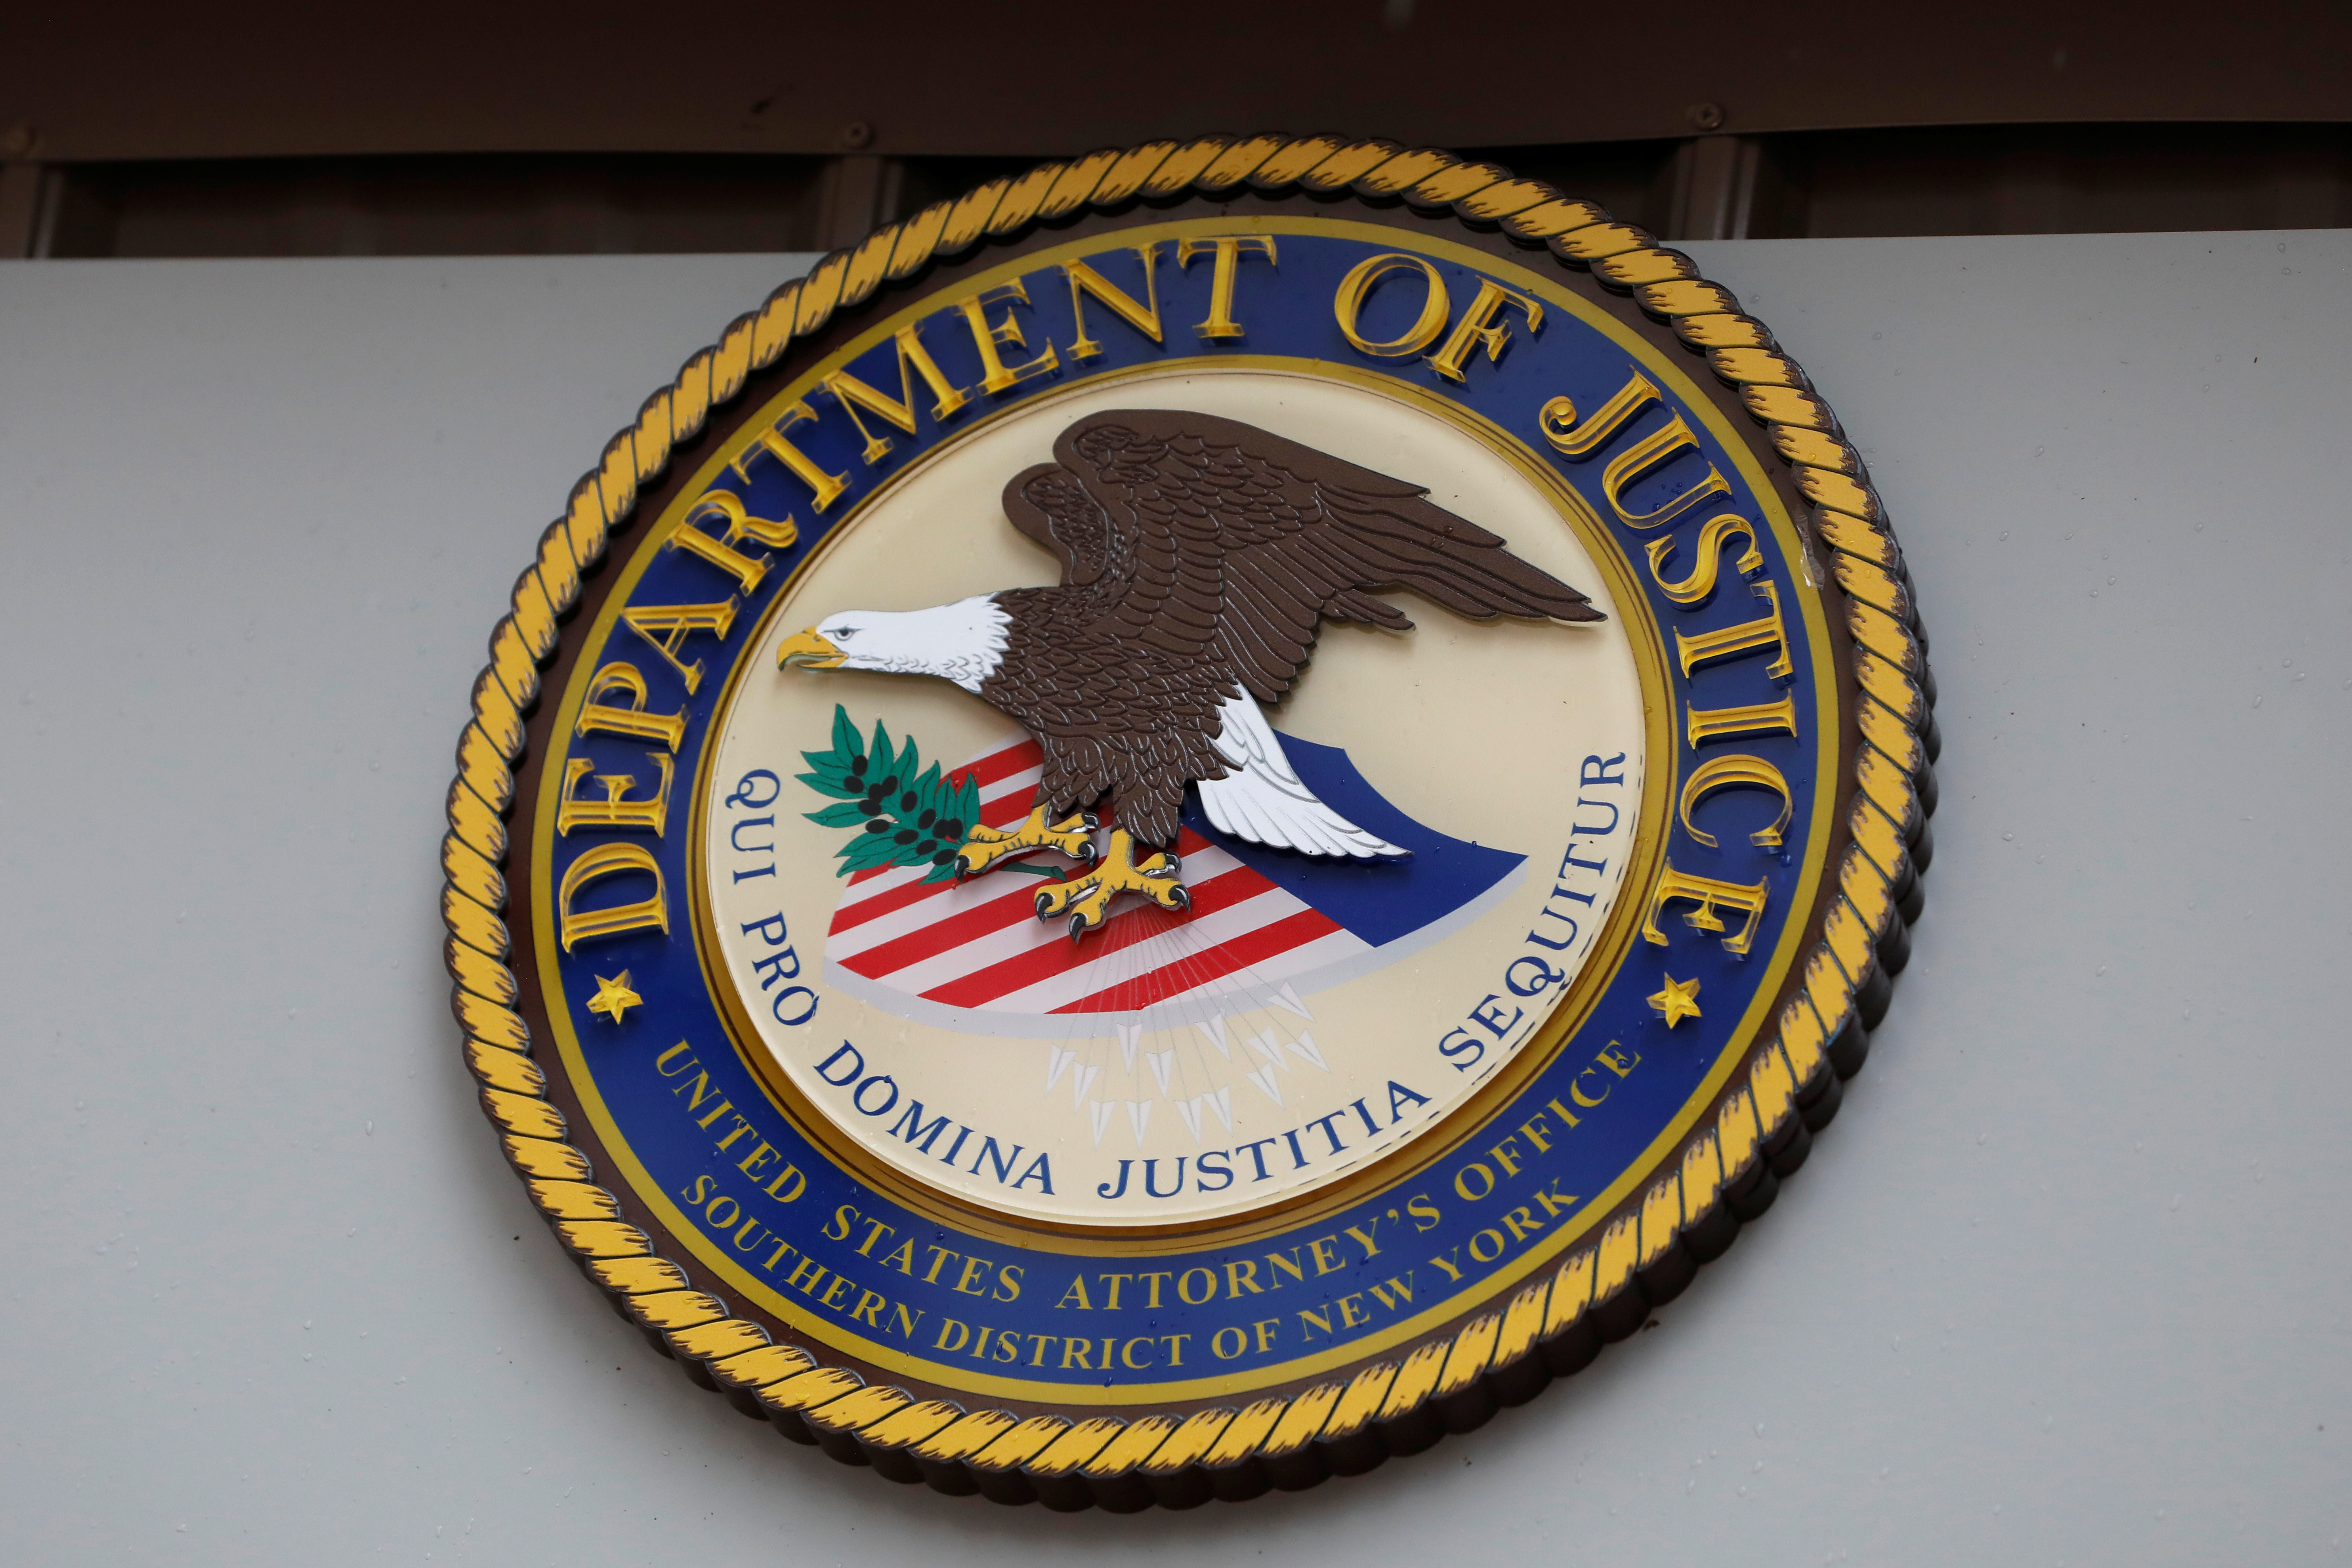 The seal of the United States Department of Justice is seen on the building exterior of the United States Attorney's Office of the Southern District of New York in Manhattan, New York City, U.S., August 17, 2020. REUTERS/Andrew Kelly/File Photo